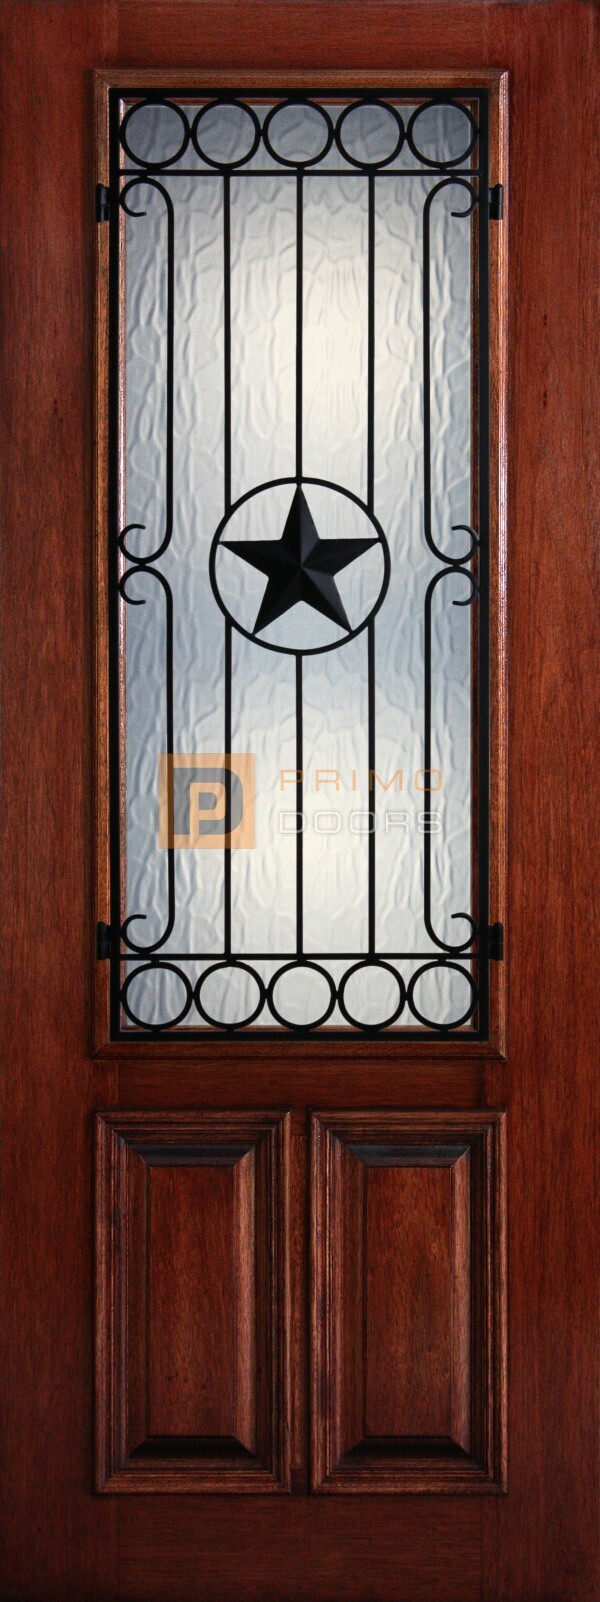 8′ 2/3 Lite Decorative Glass with Iron Grill - Mahogany Single Front Door – PD 3080-23 AVIG